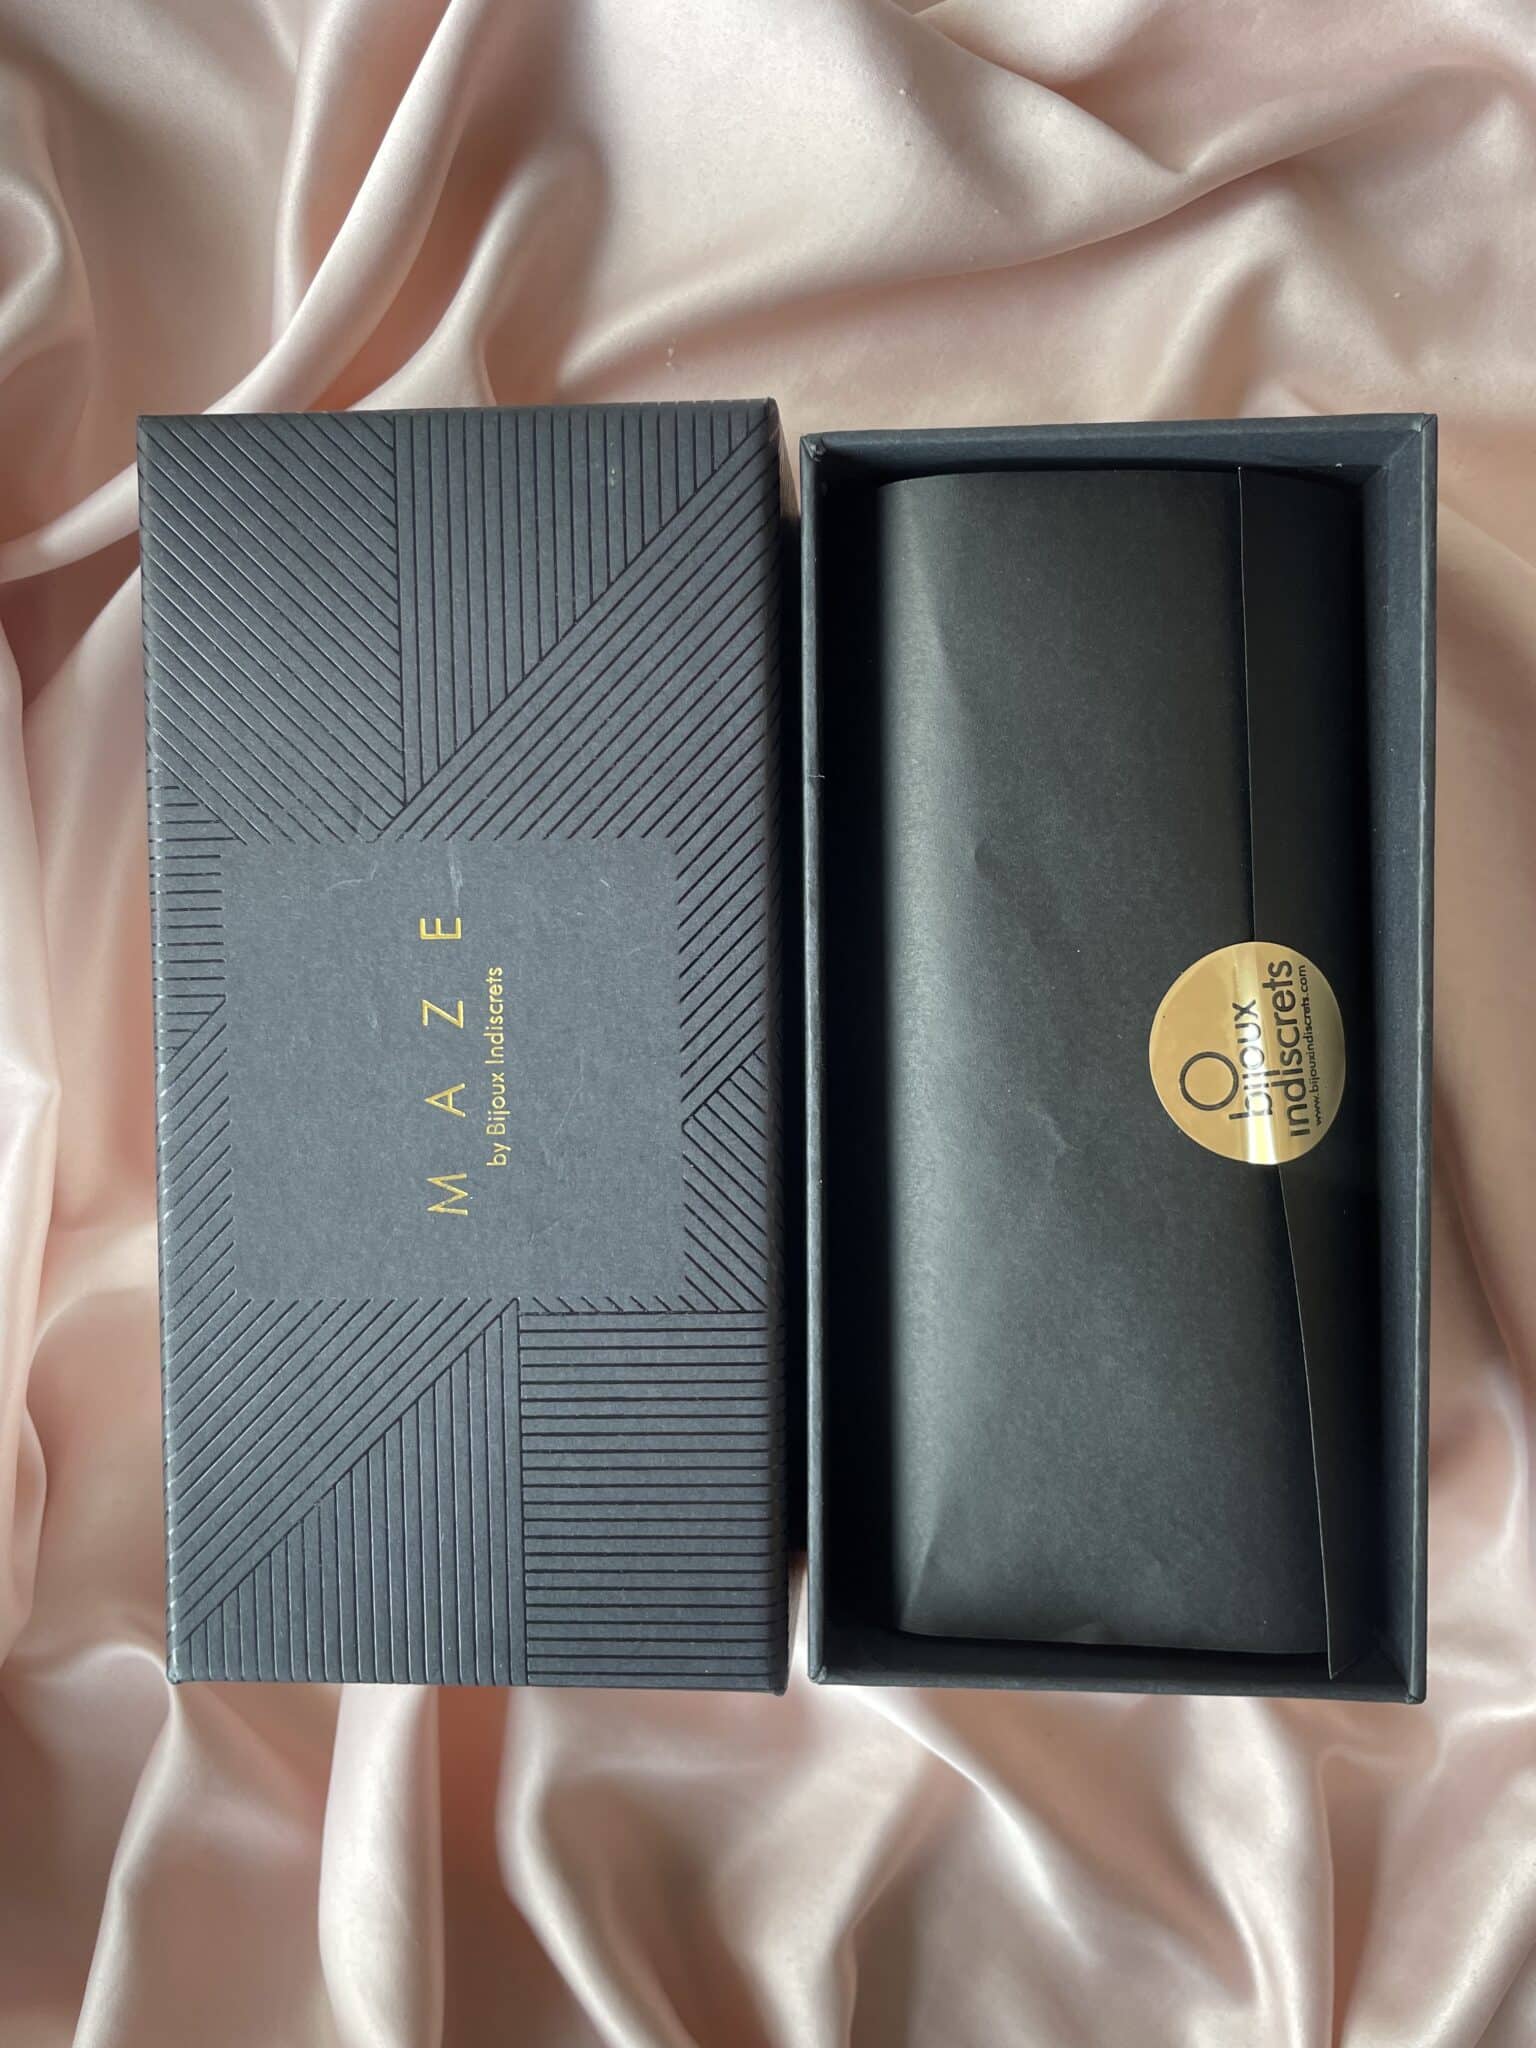 Bijoux Indiscrets Maze Single Choker Unwrapping Excitement: A Packaging Review